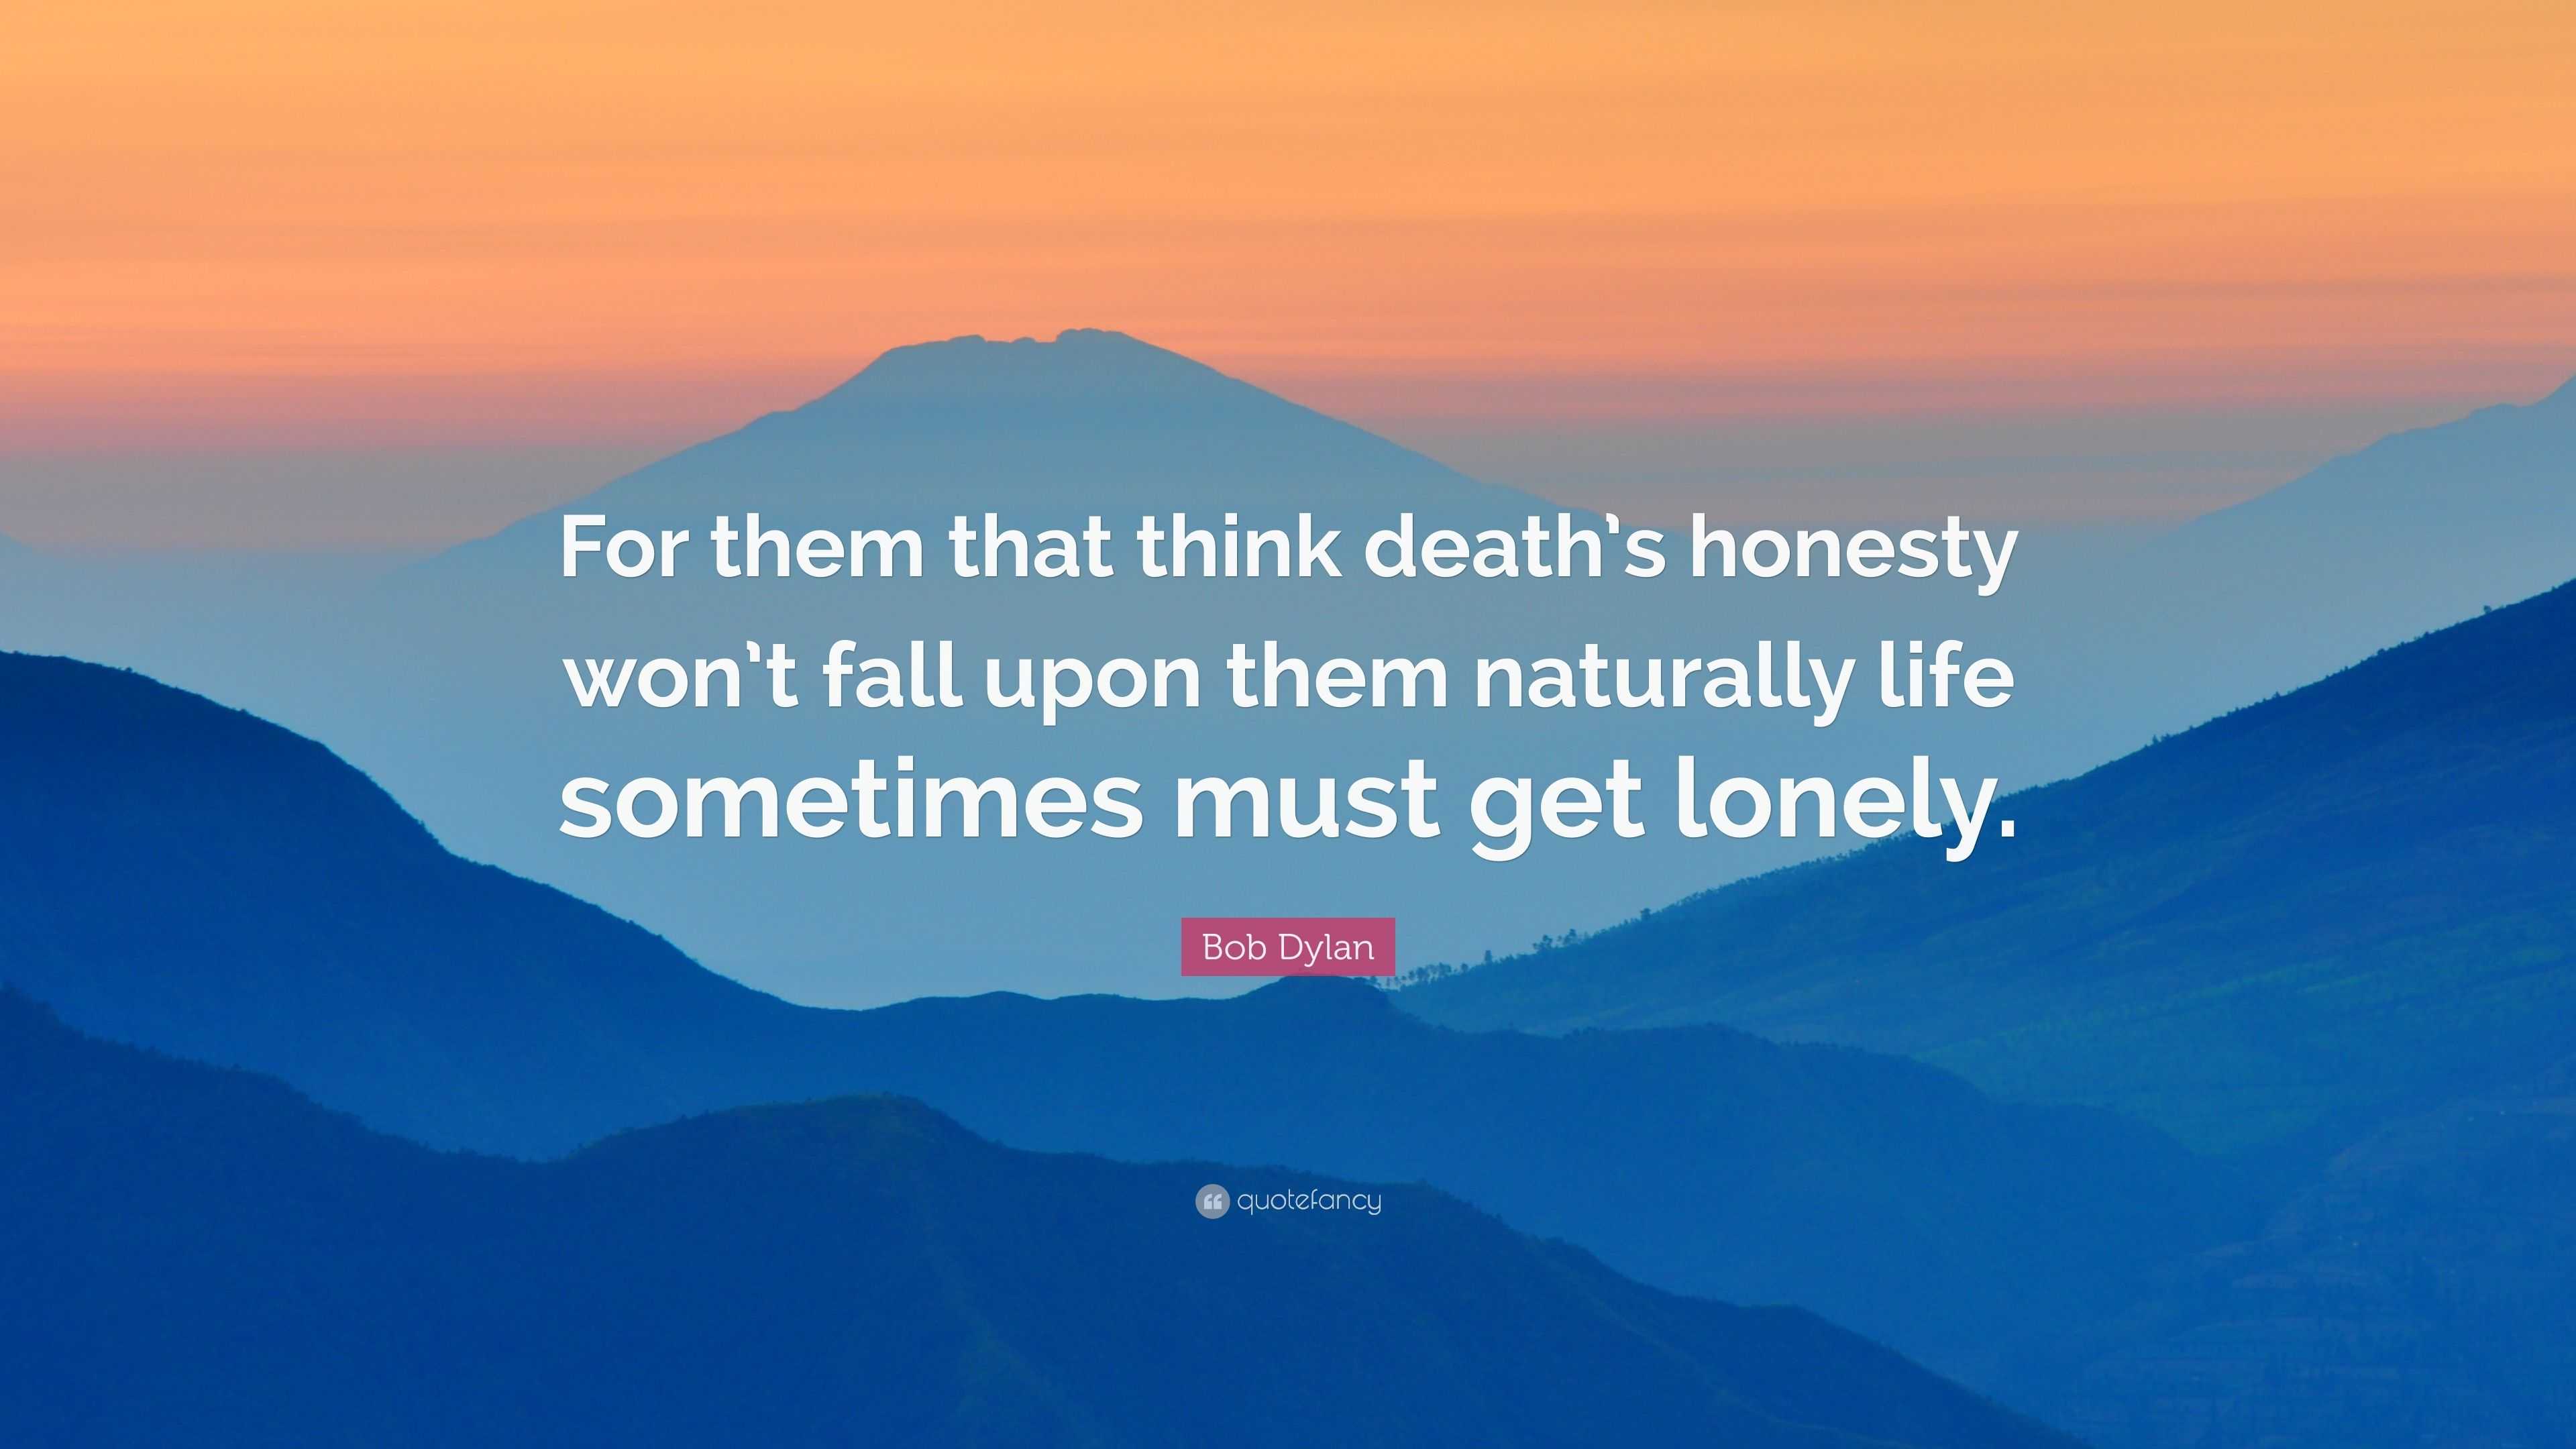 Bob Dylan Quote: “For them that think death’s honesty won’t fall upon ...